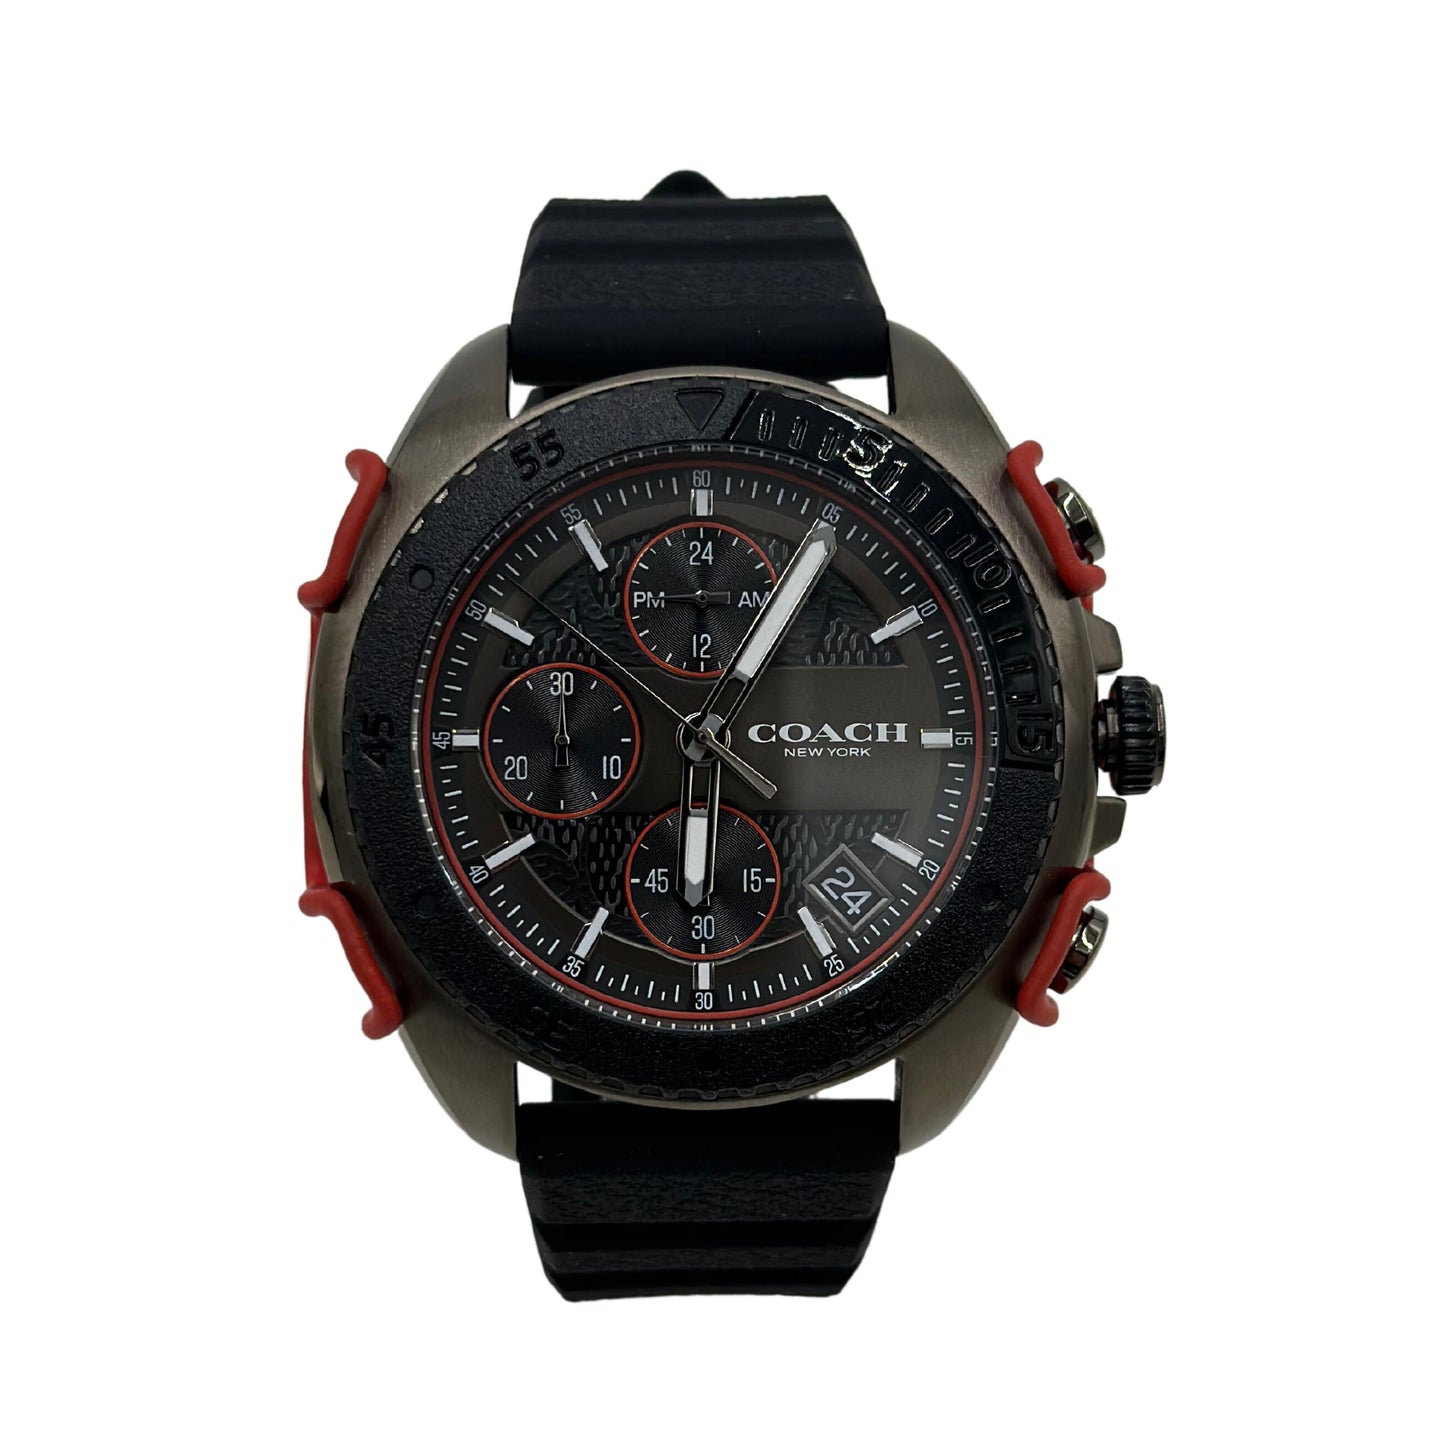 Coach Chronograph Black Silicone Band 45 mm Case Men's Watch - 14602453